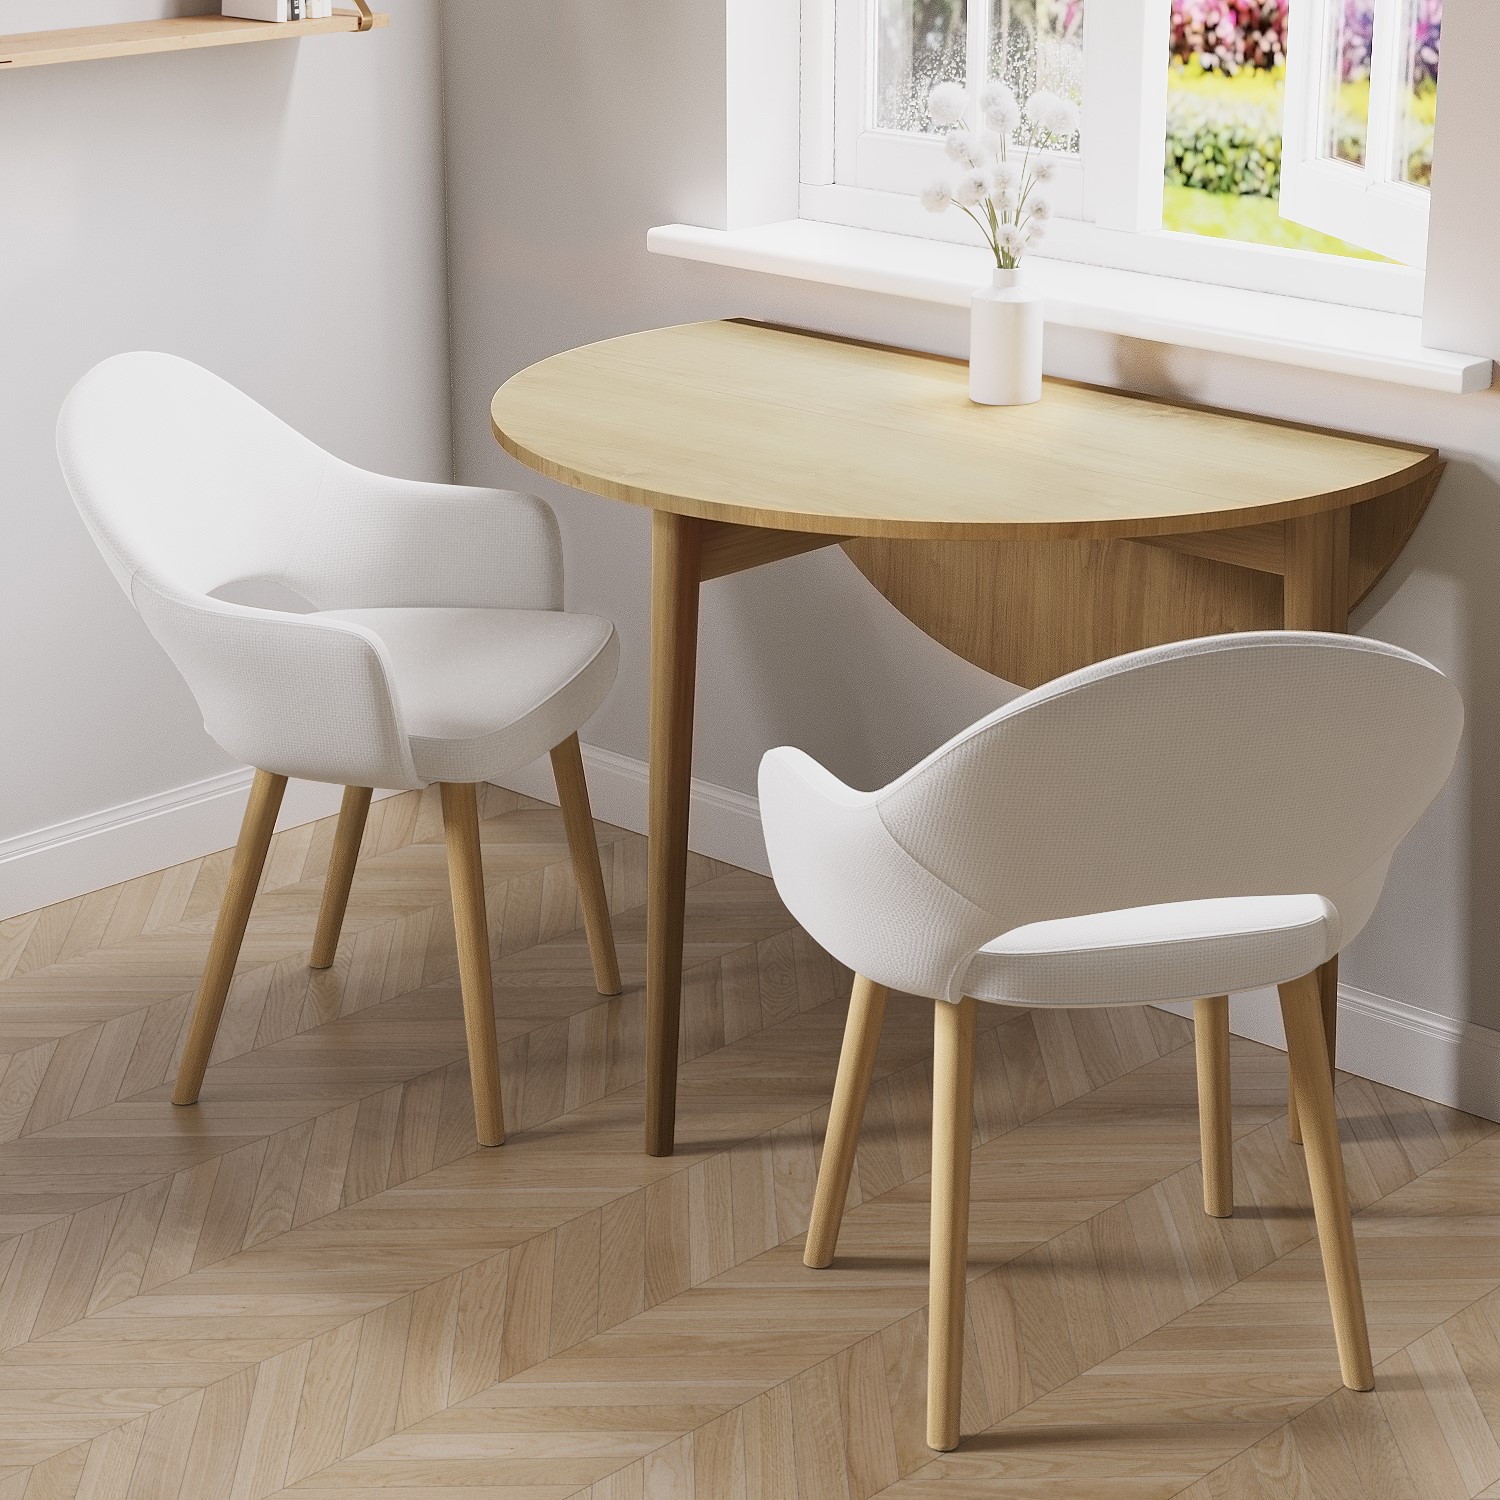 Photo of Round oak drop leaf dining table with 2 cream recycled fabric dining chairs - rudy